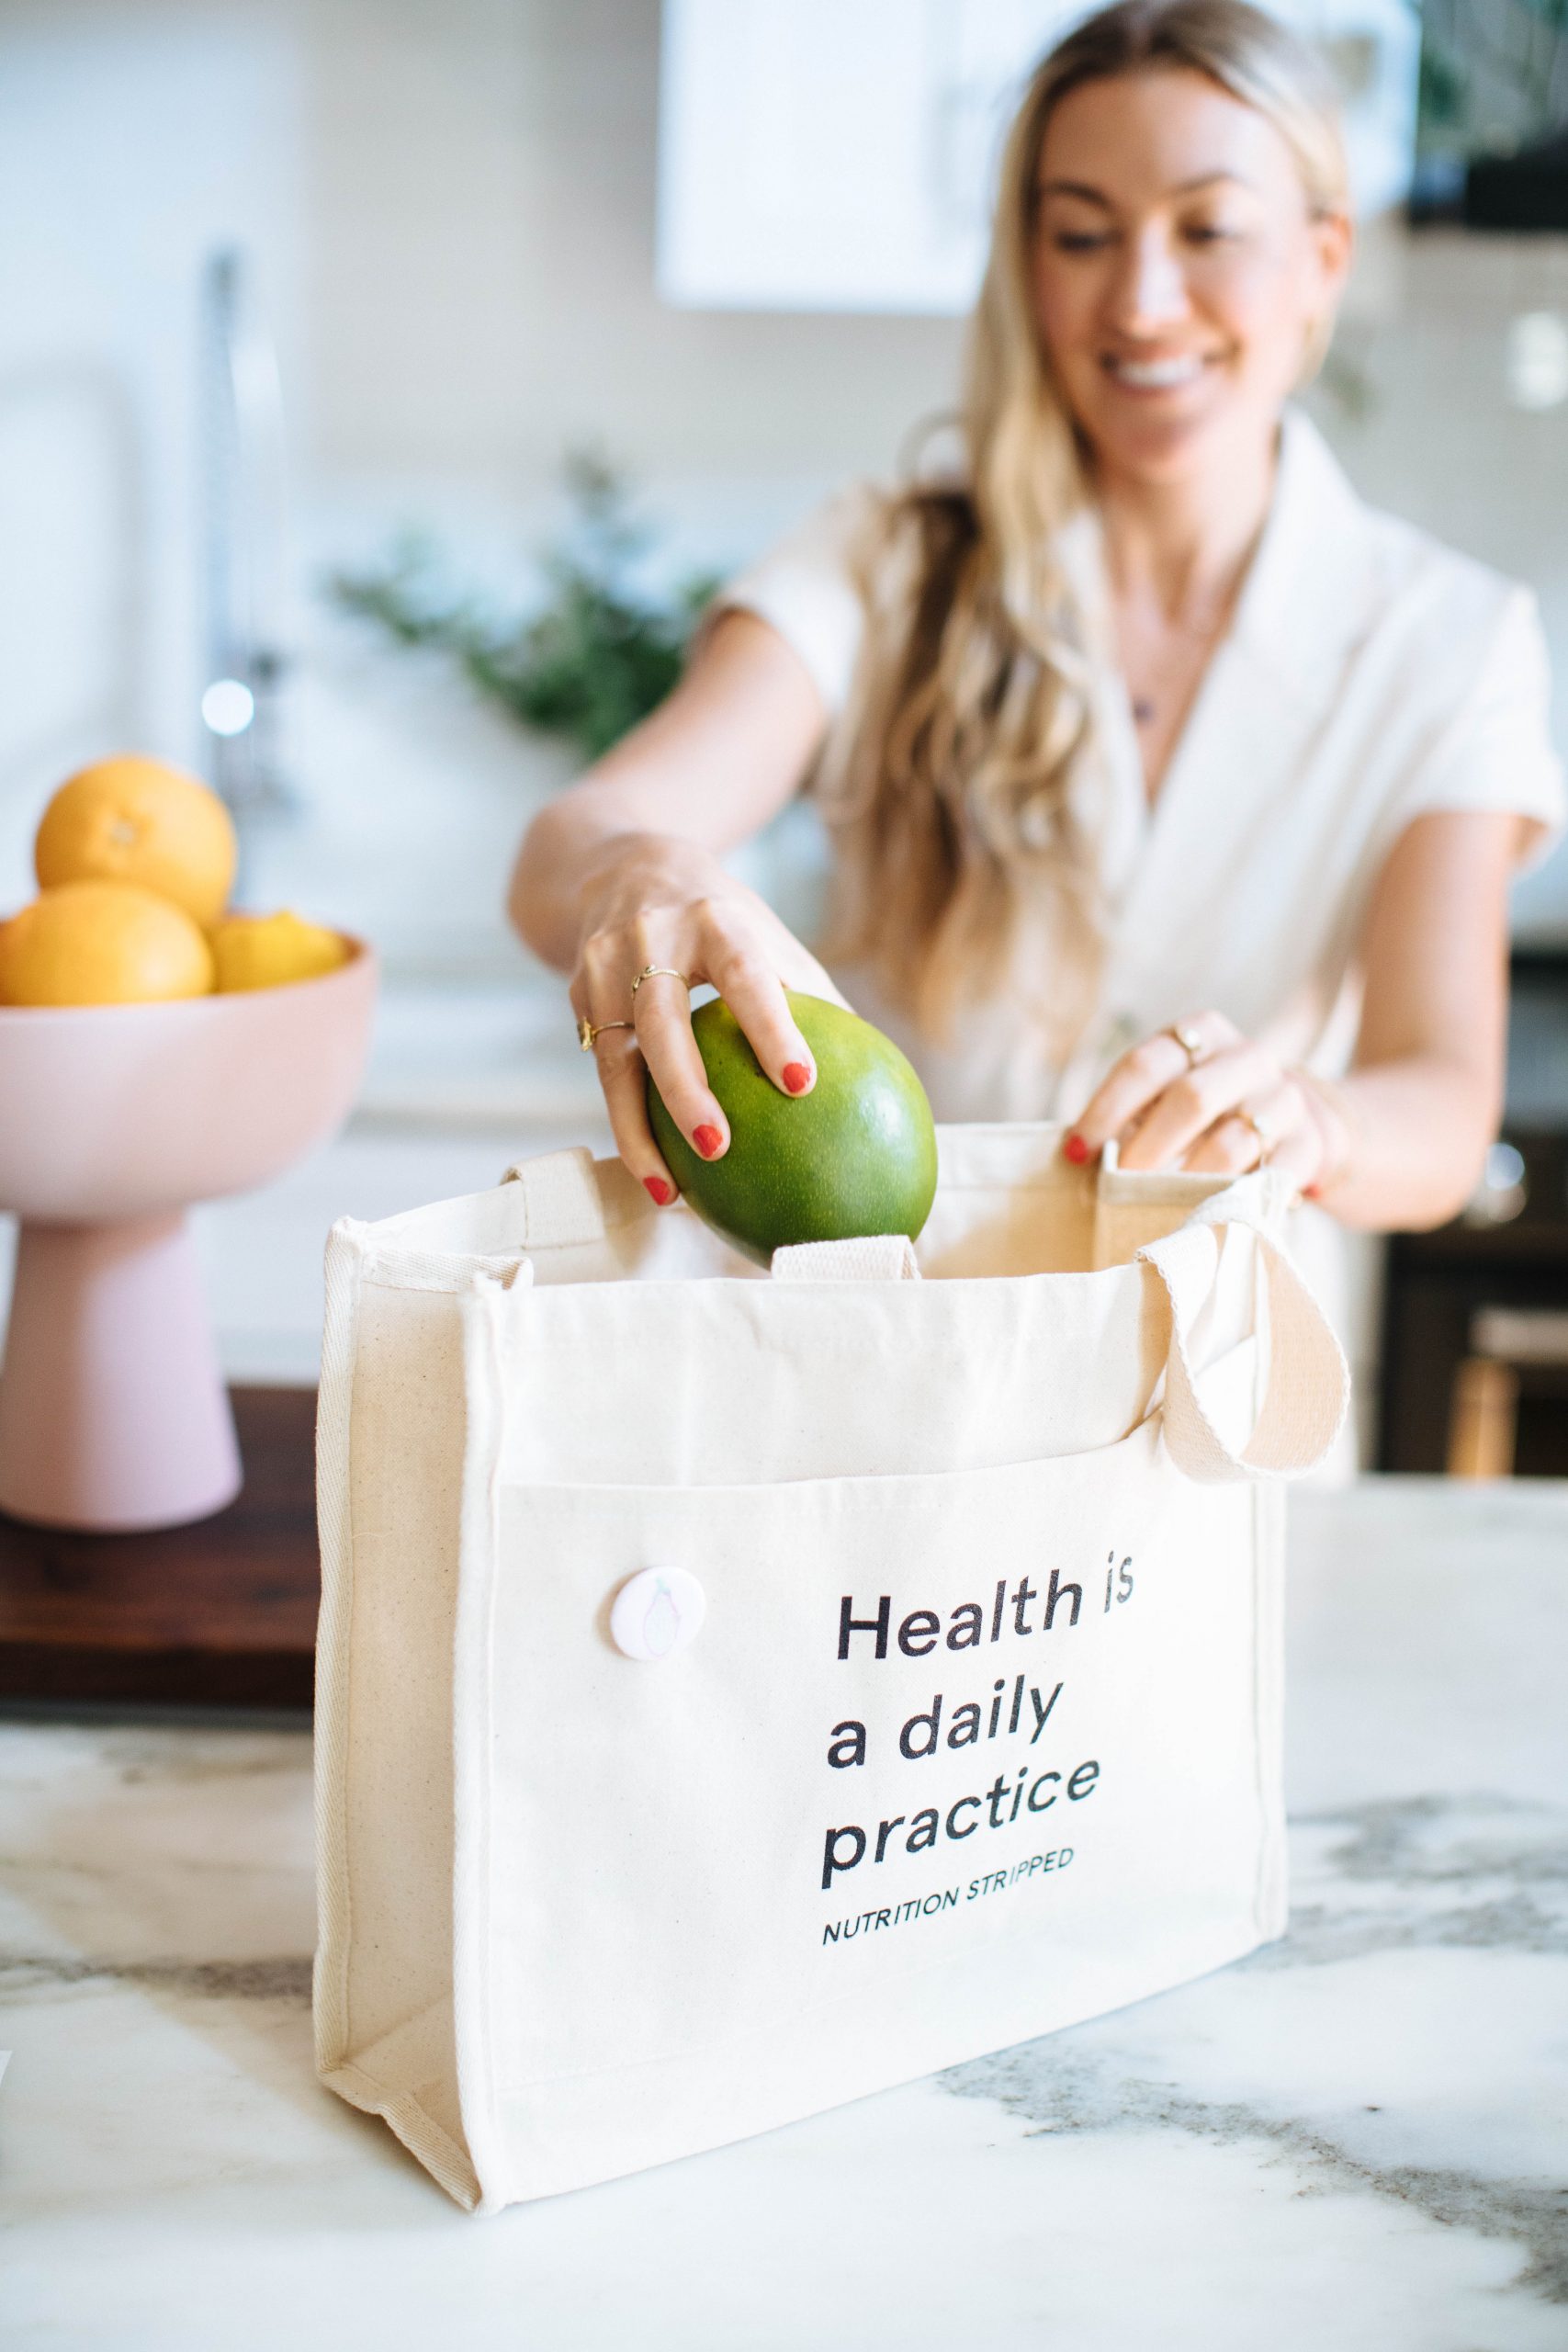 5 Benefits of Nutrition Coaching with a Registered Dietitian